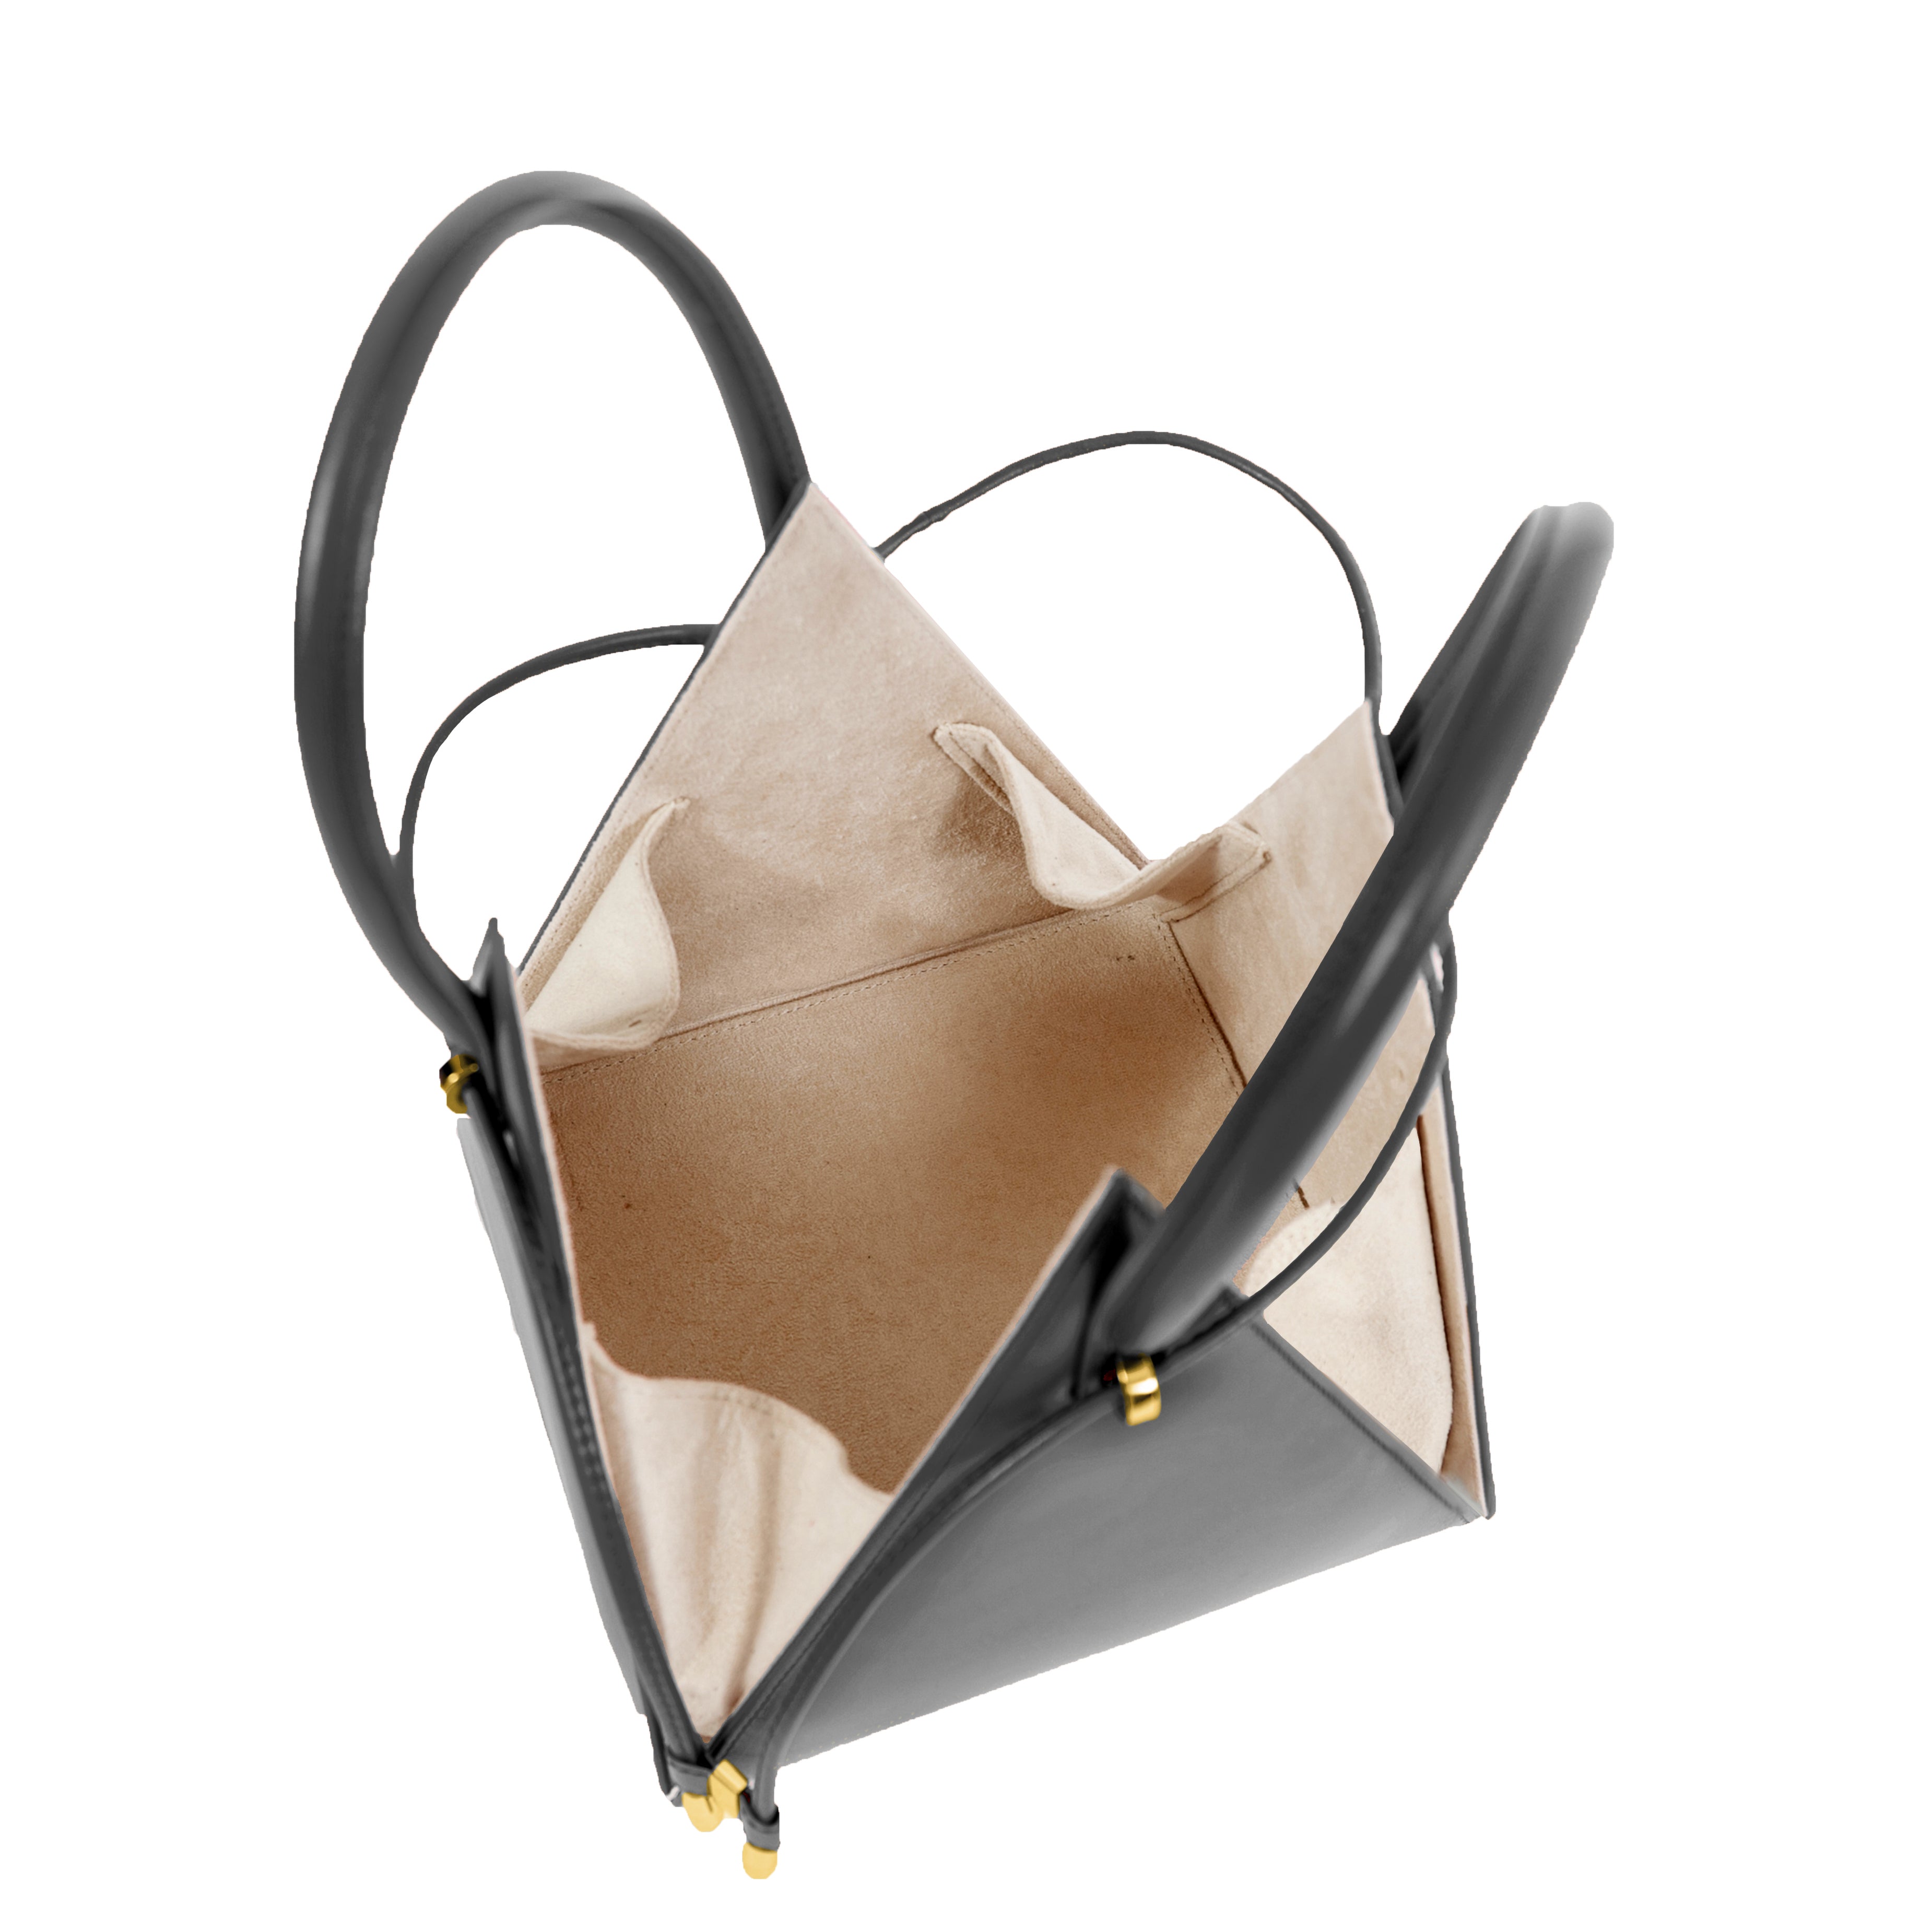 Buy now the Iconic Lia Handbag inspired by the geometric shapes of our designer's birth city Barcelona, and its world known artist, Antonio Gaudí, architect of the world wonder La Sagrada Familia. The Iconic Lia Black Handbag has a unique and functional pyramidal design able to fit all your essentials. 